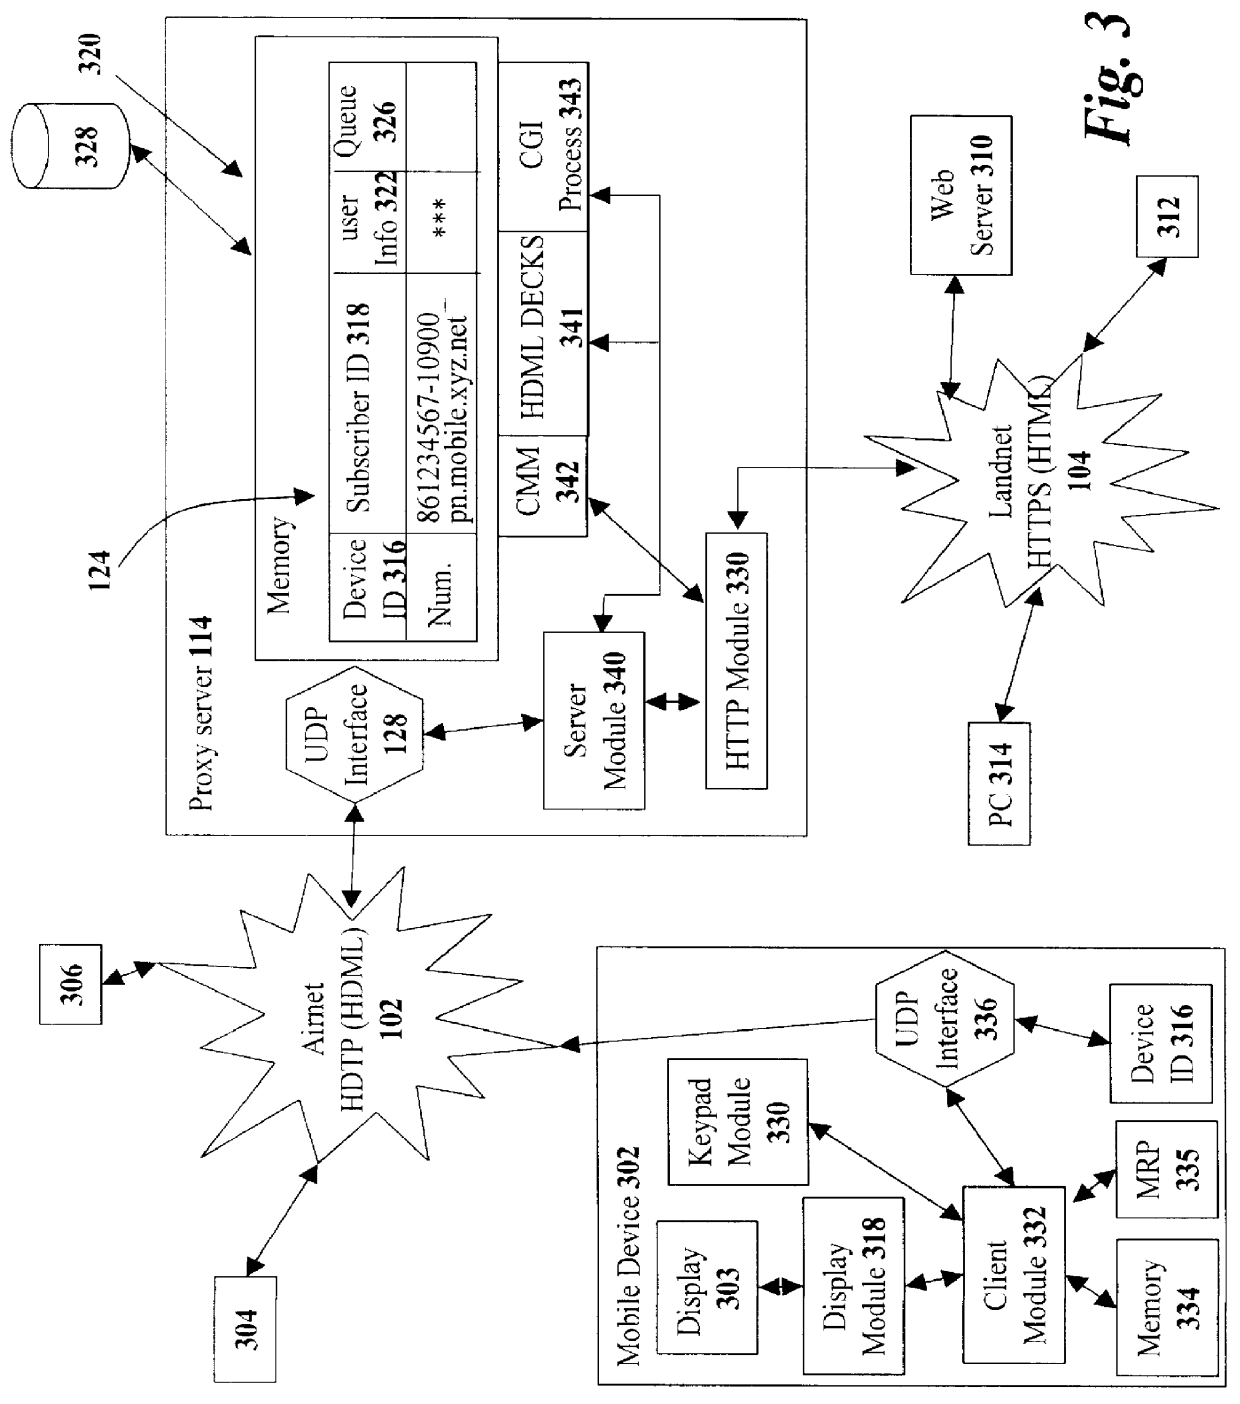 Method and system for pushing and pulling data using wideband and narrowband transport systems